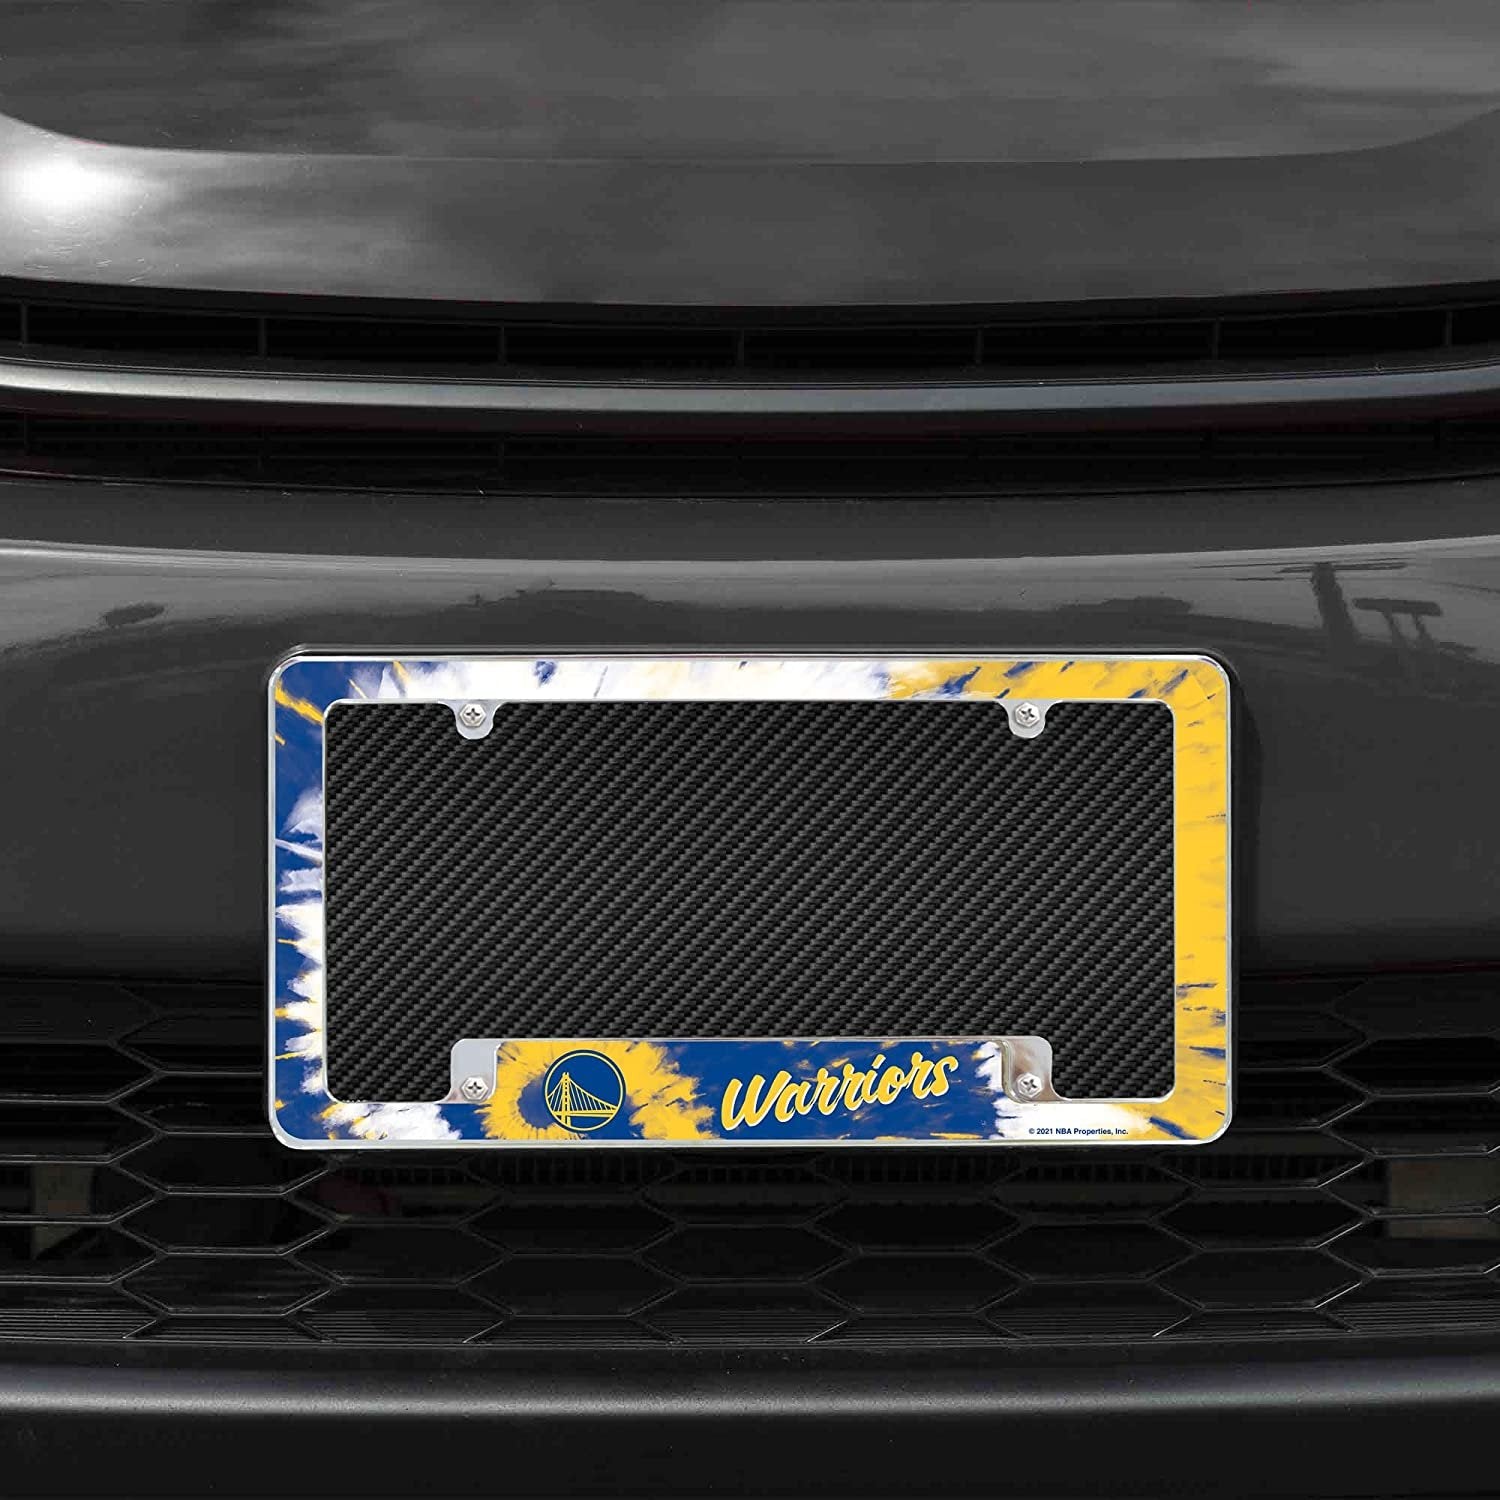 Golden State Warriors Metal License Plate Frame Chrome Tag Cover Tie Dye Design 6x12 Inch